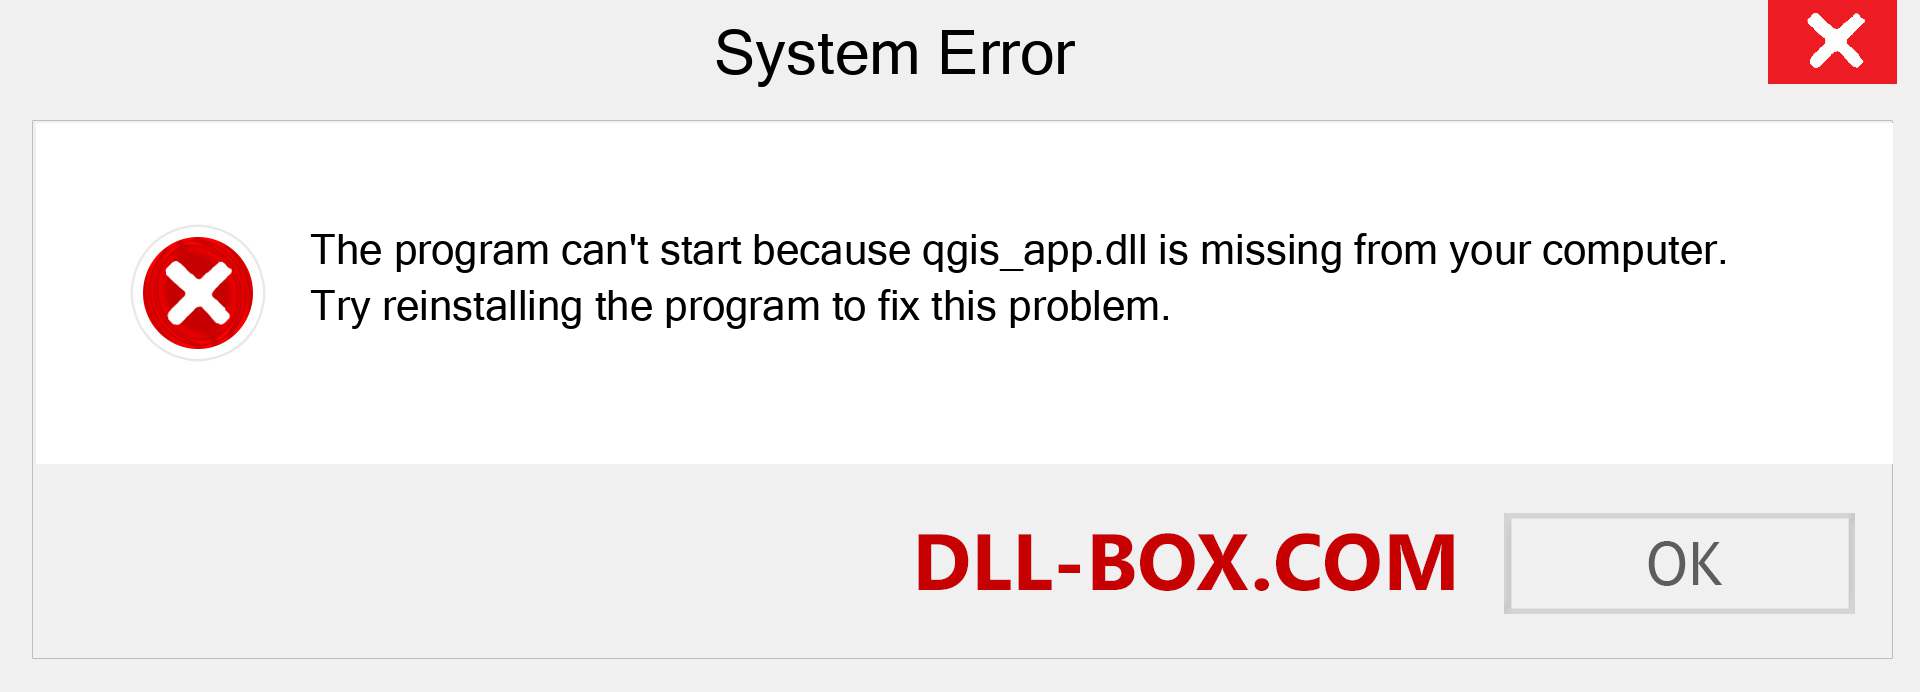  qgis_app.dll file is missing?. Download for Windows 7, 8, 10 - Fix  qgis_app dll Missing Error on Windows, photos, images